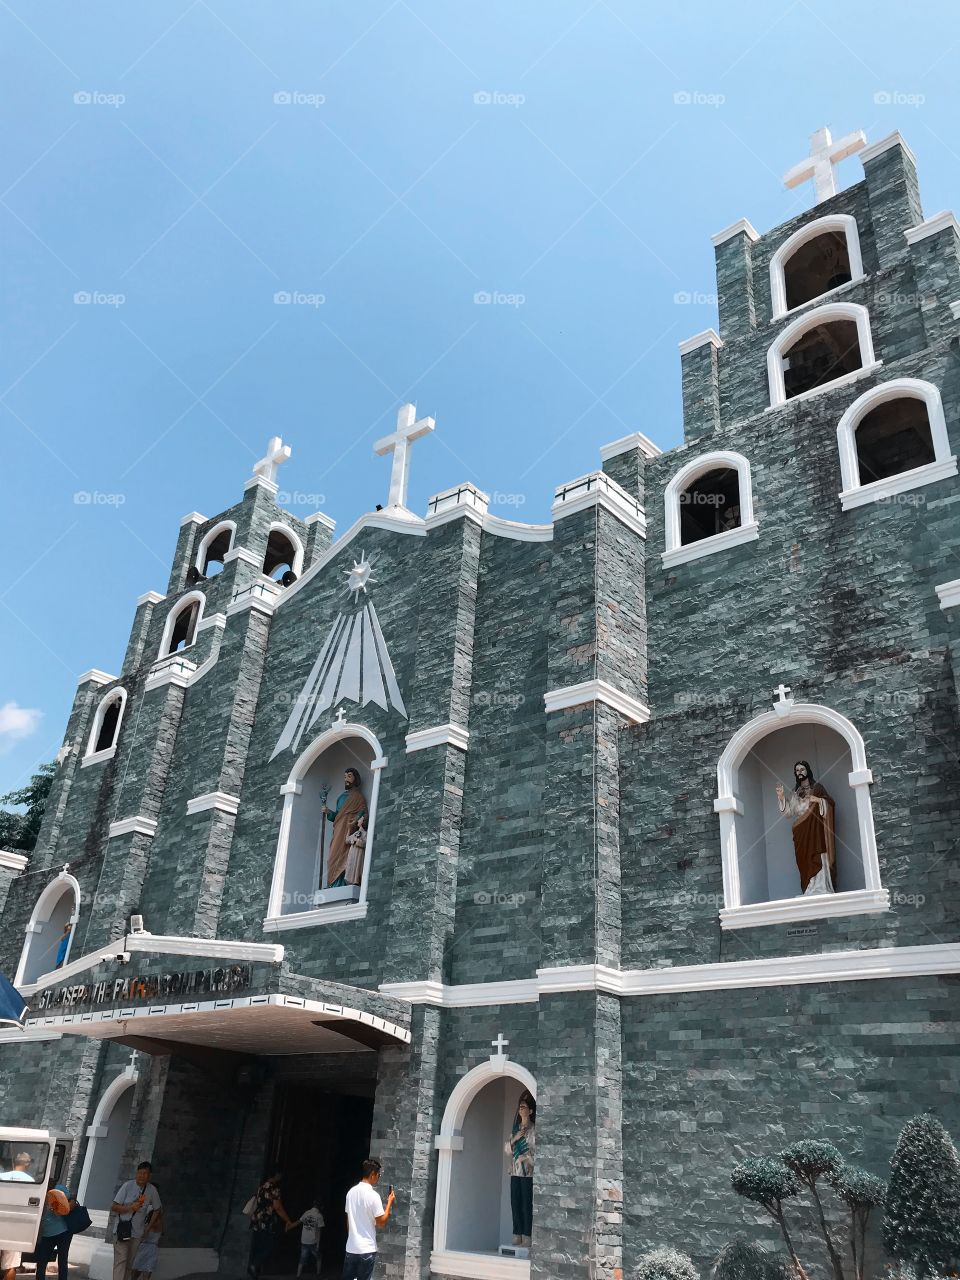 Church in the Philippines